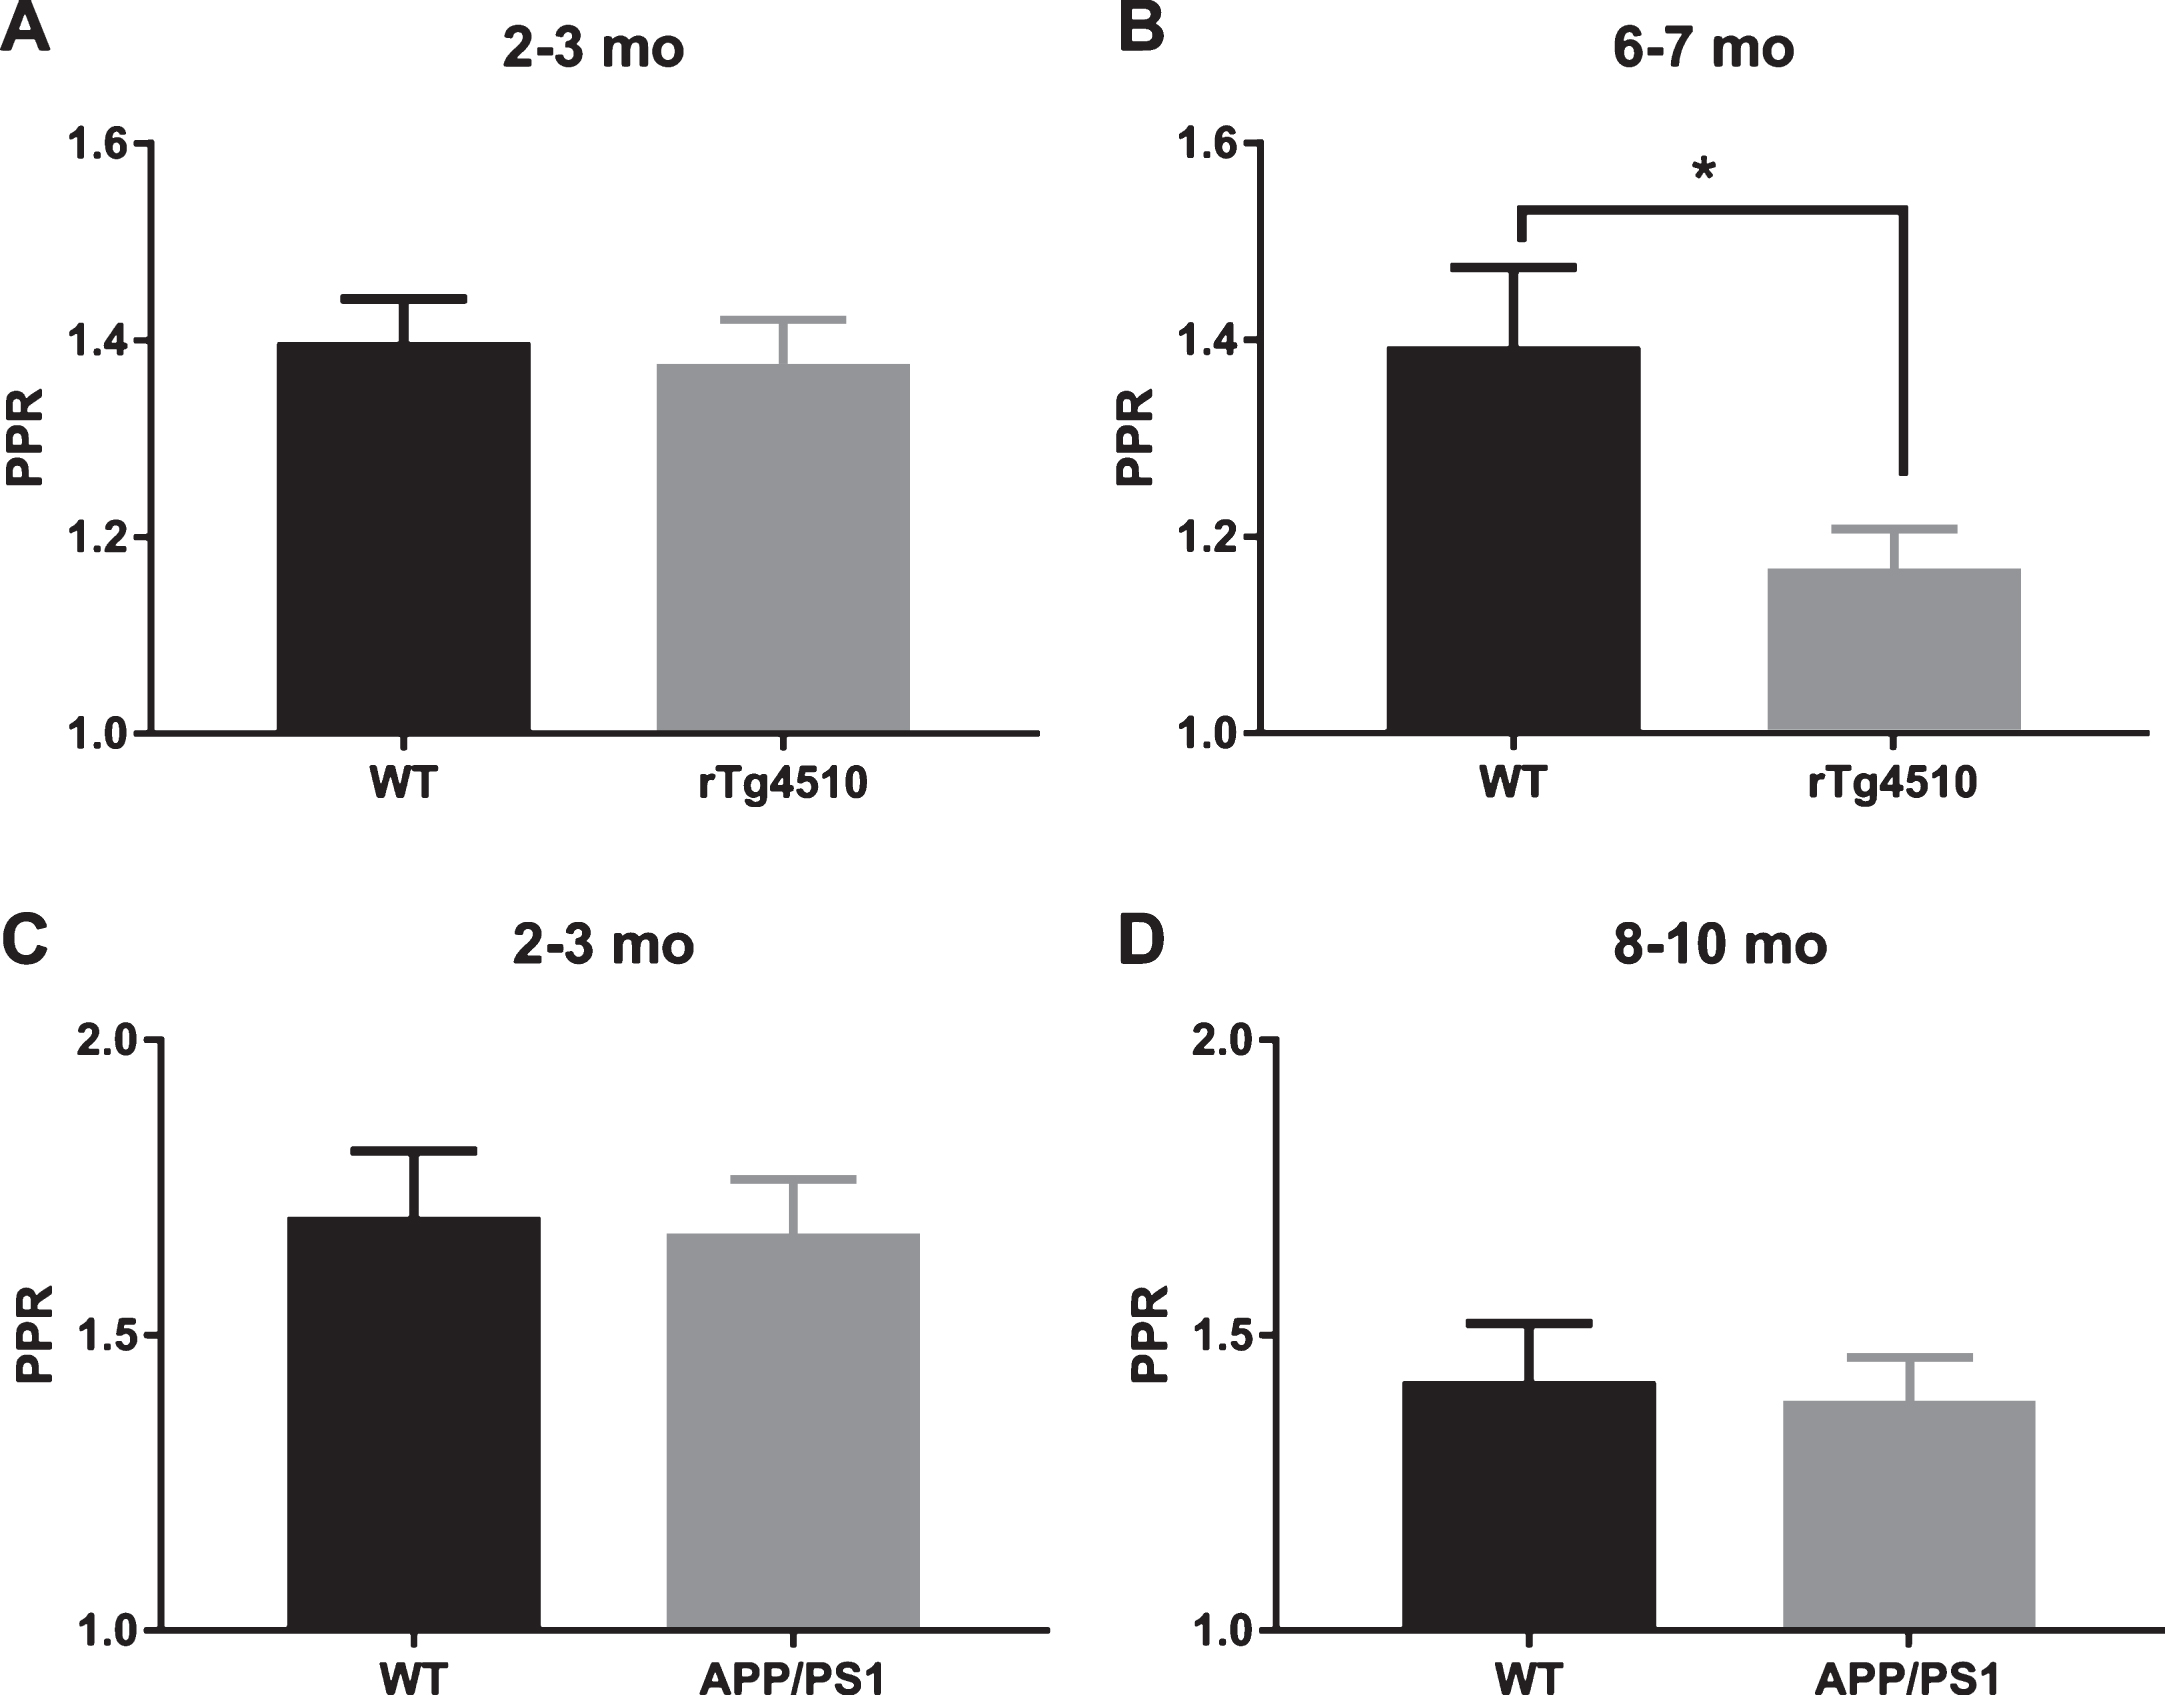 Short term facilitation in rTg4510 and APP/PS1 mice. A) 2-3-month-old rTg4510 mice do not show a deficit in paired pulse facilitation (WT: n = 17 slices from 5 animals, rTg4510: n = 17 slices from 6 animals; two-tailed t-test p = 0.7193). B) 6-7-month-old rTg4510 mice show a deficit in paired pulse facilitation (WT n = 17 slices from 6 animals, rTg4510 n = 17 slices from 5 animals; two-tailed t-test p = 0.0177). C) 2-3-month-old APP/PS1 mice do not show a deficit in paired pulse facilitation (WT n = 15 slices from 3 animals, APP/PS1 n = 13 slices from 5 animals; two-tailed t-test p = 0.8550). D) 8–10-month-old APP/PS1 mice do not show a deficit in paired pulse facilitation (WT n = 17 slices from 6 animals, APP/PS1 n = 17 slices from 5 animals; two-tailed t-test p = 0.7936).